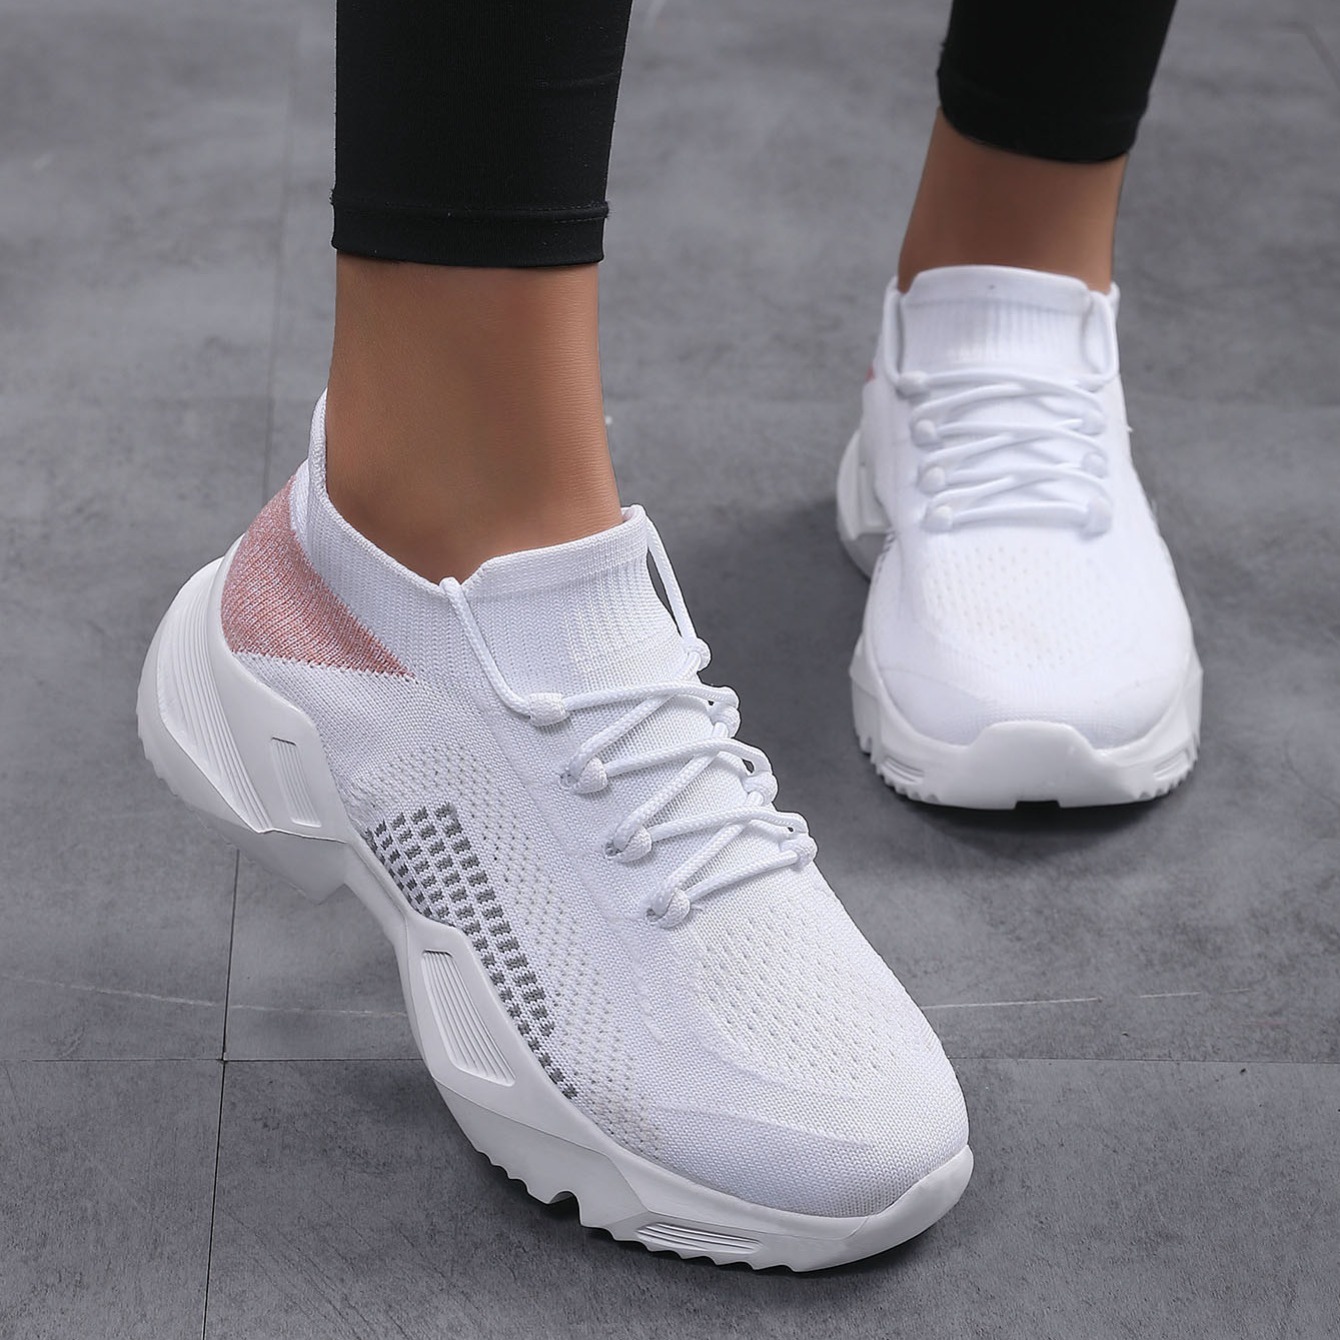 Women's White Running Shoes, Lace Up Knit Workout Gym Tennis Athletic  Shoes, Flying Woven Comfort Casual Sneakers